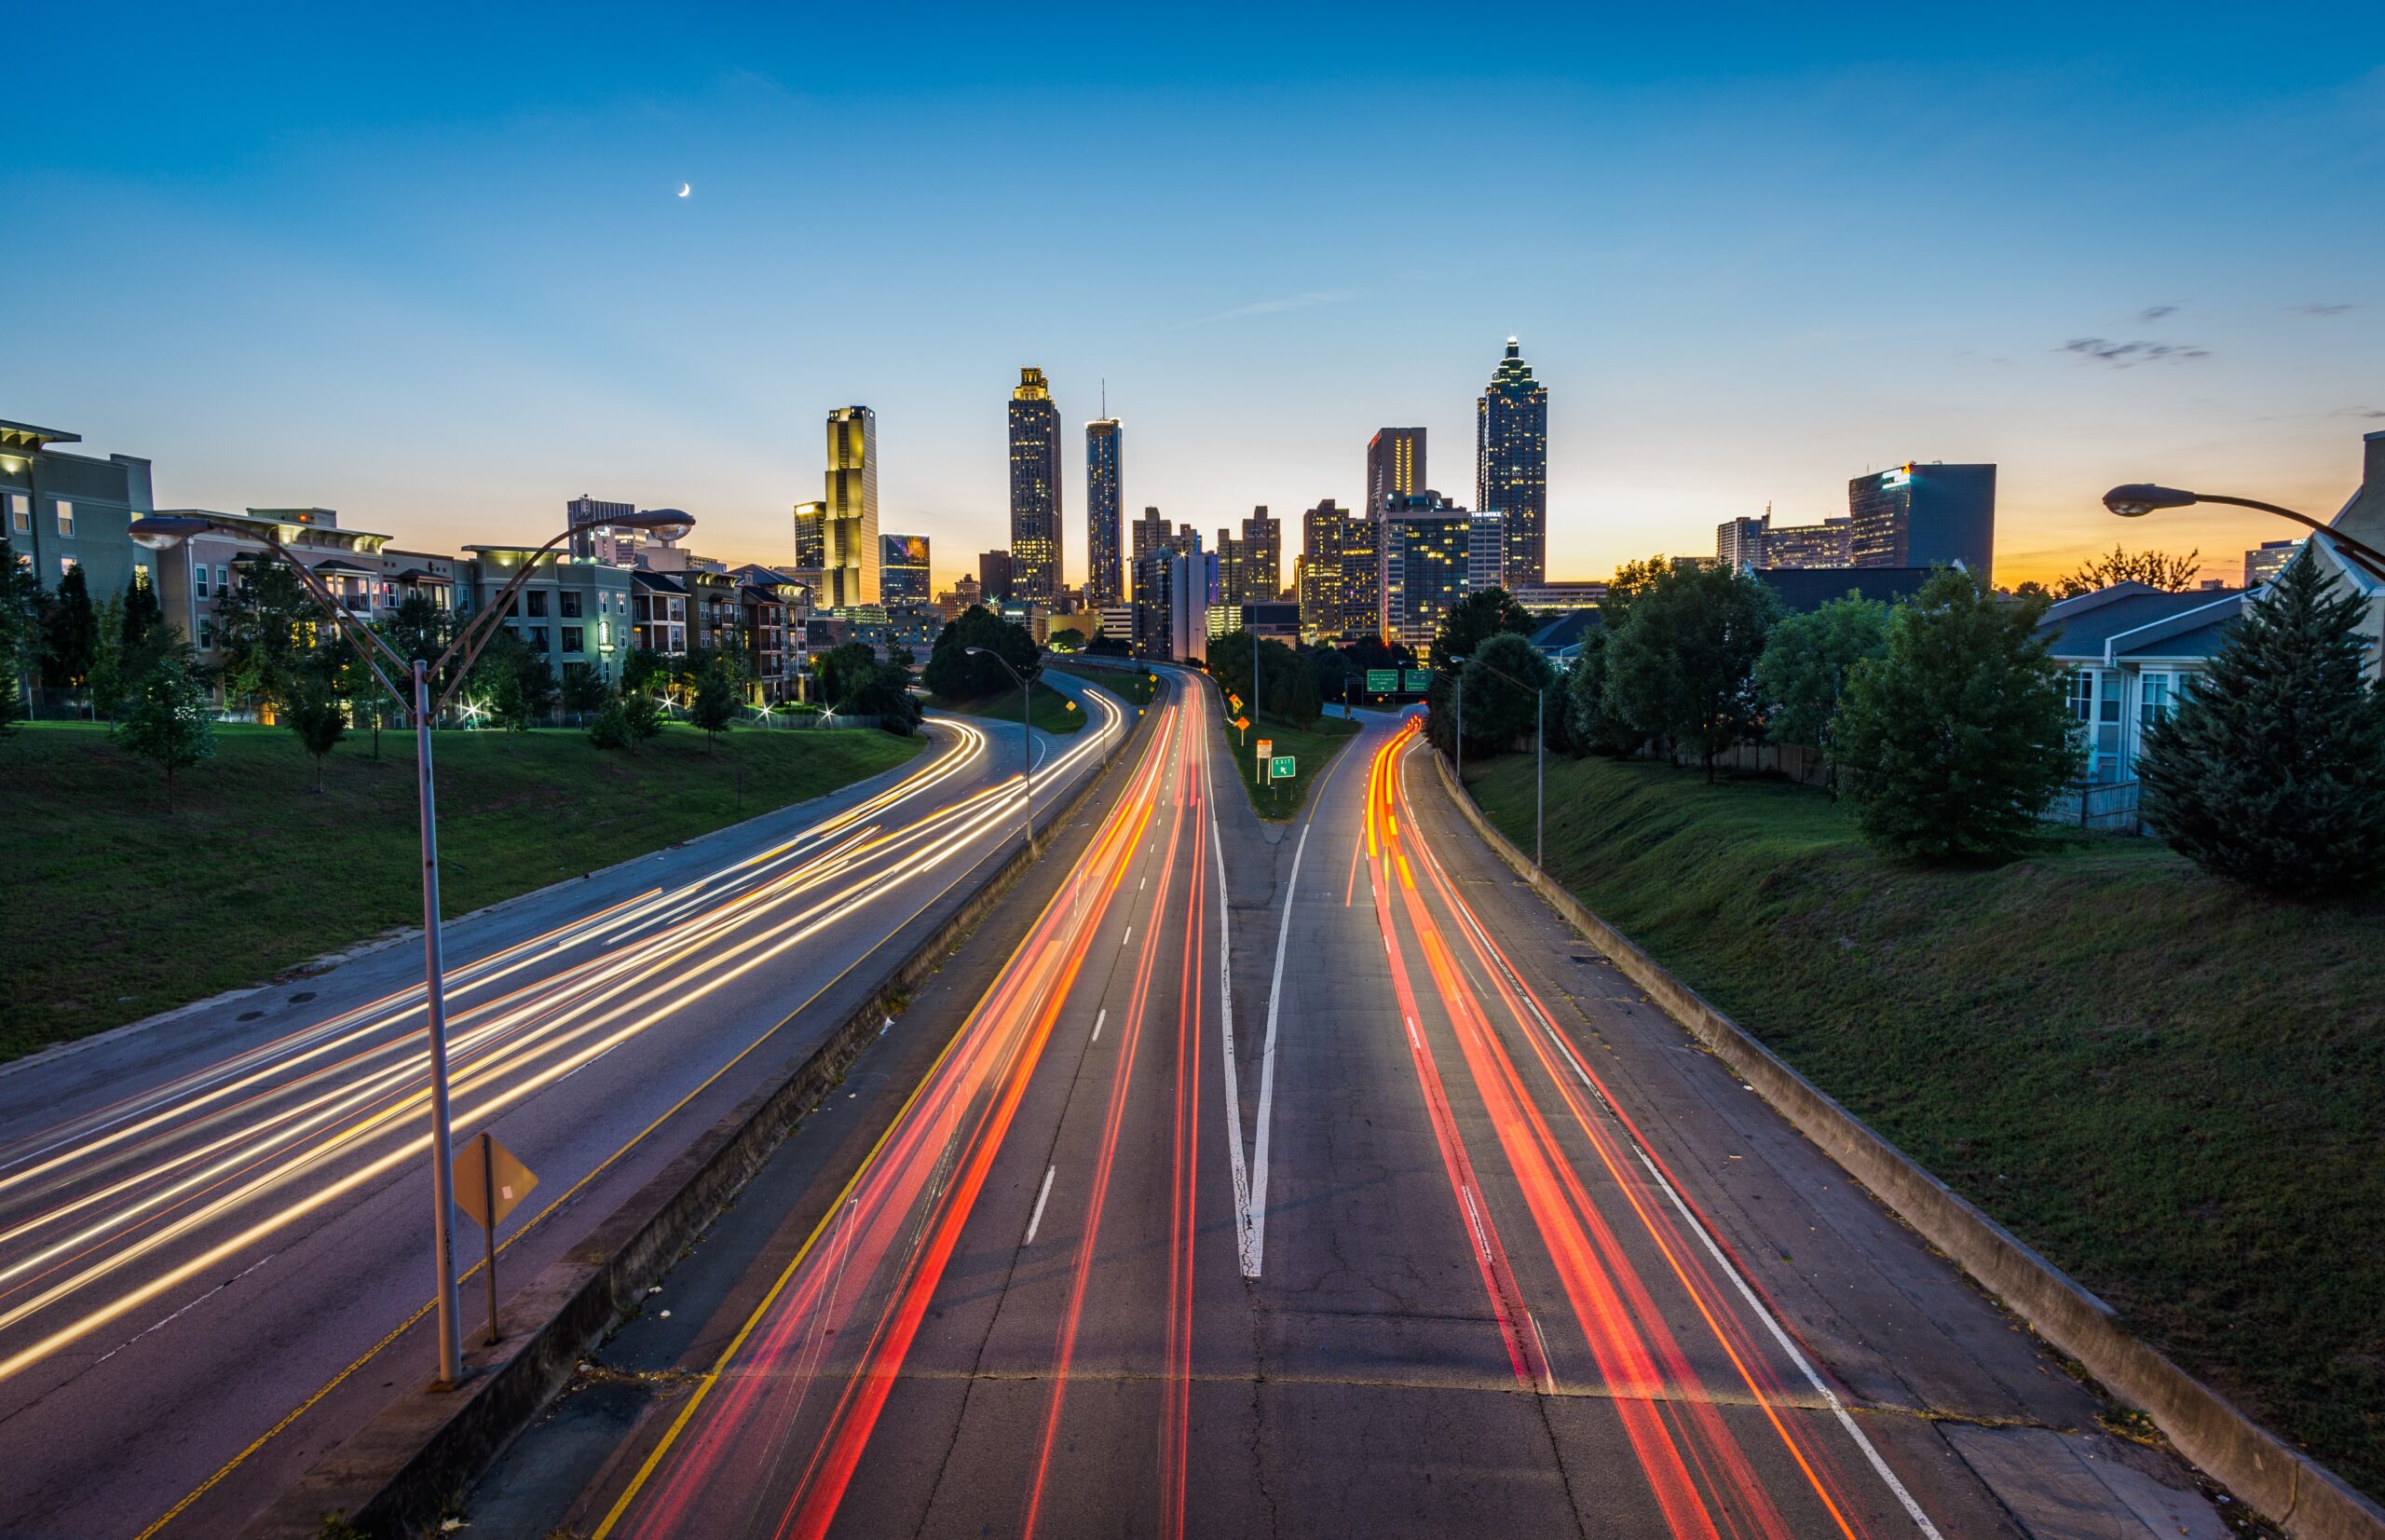 Atlanta is one of the best places for Black families because of the culture and the climb in homeownership in the city. Pictured: The Atlanta skyline.